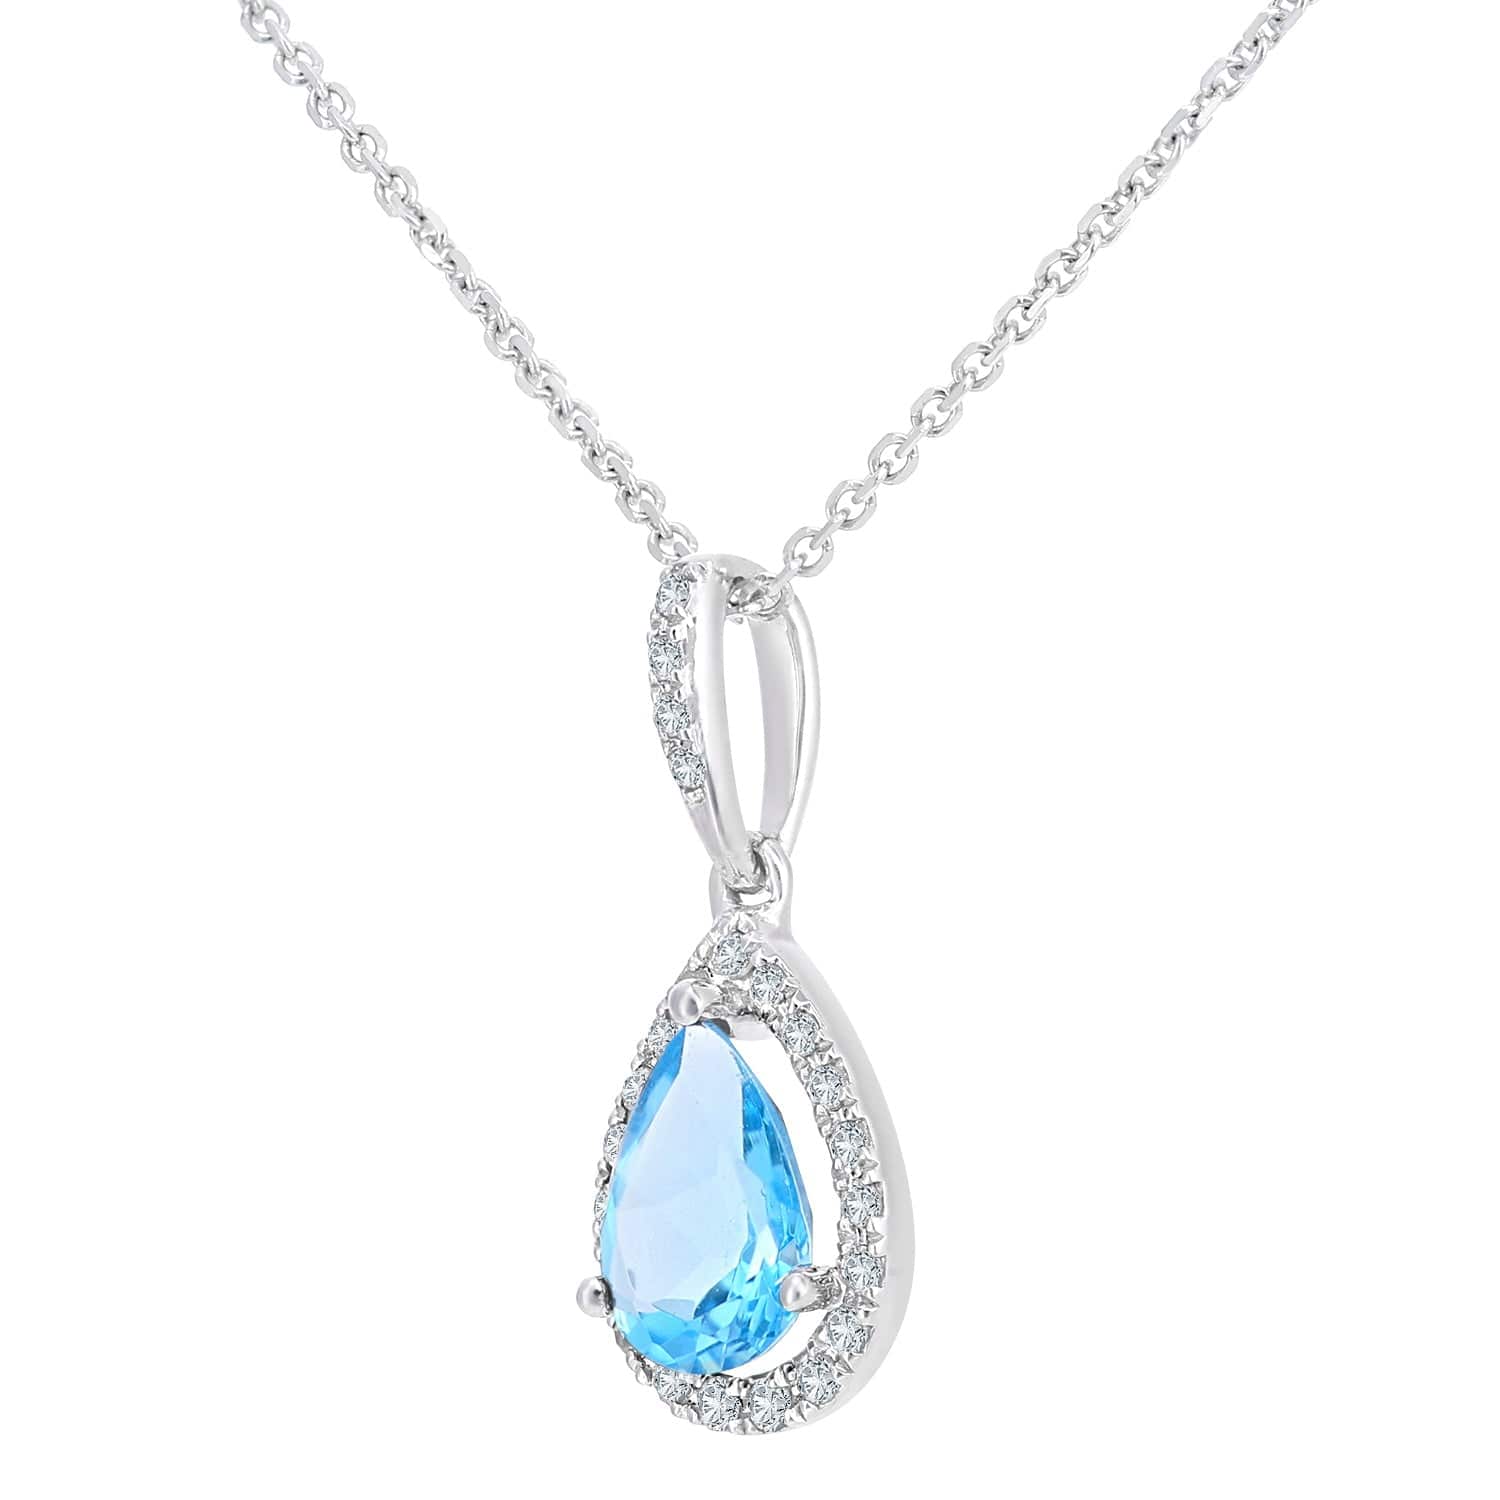 Lynora Luxe Pendant White Gold 9ct / Blue Topaz 9ct White Gold Blue Topaz and Diamond Teardrop Pendant Necklace